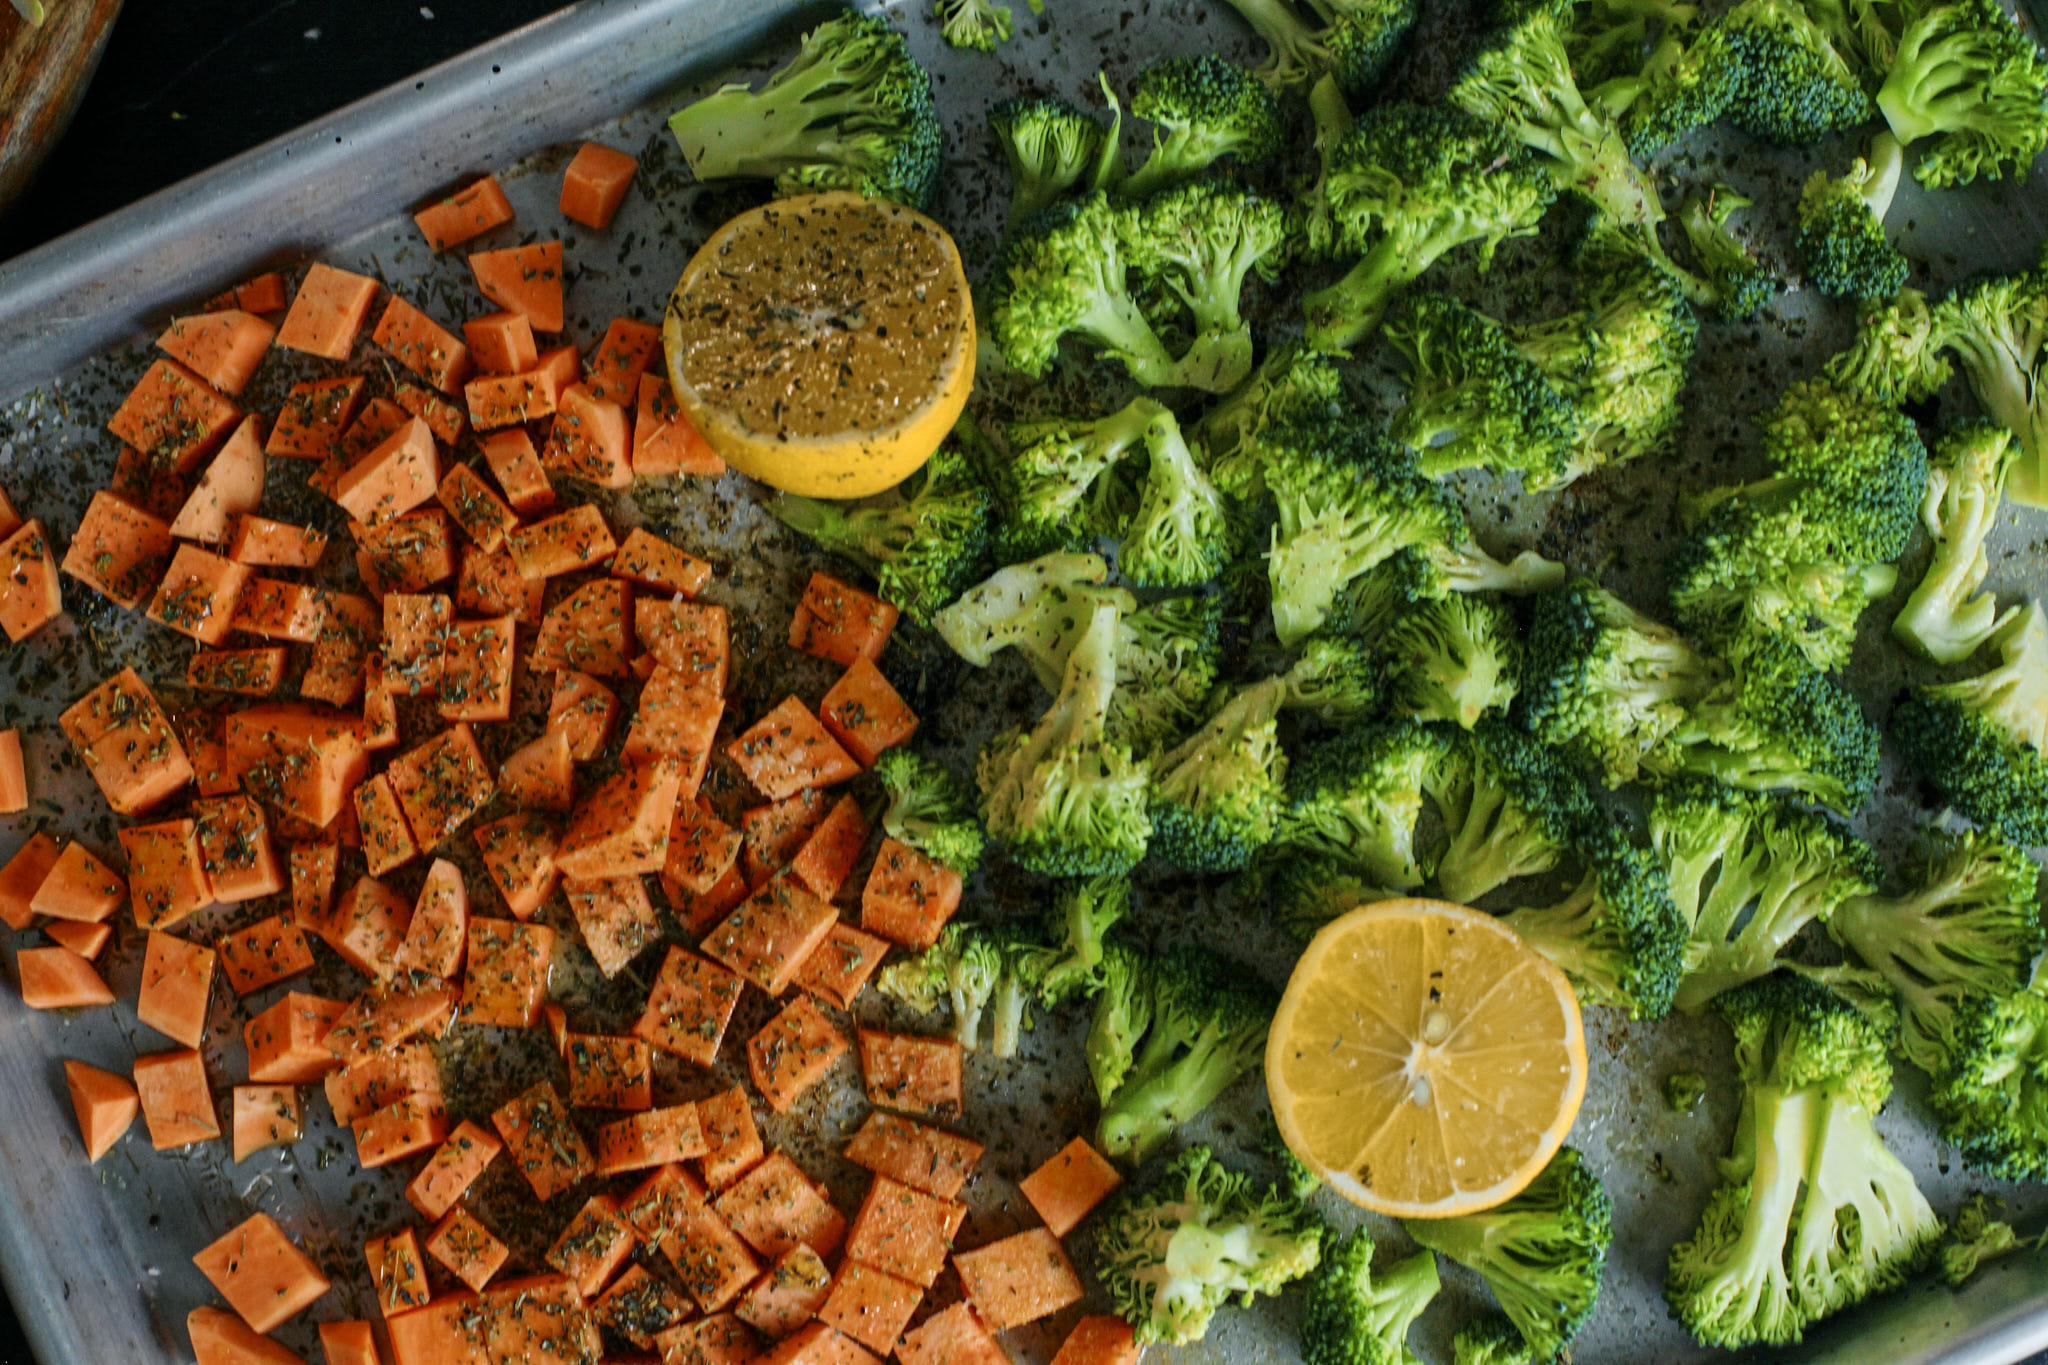 prep for warm rustic tortellini bowl - cubed up sweet potato and chopped broccoli with a lemon